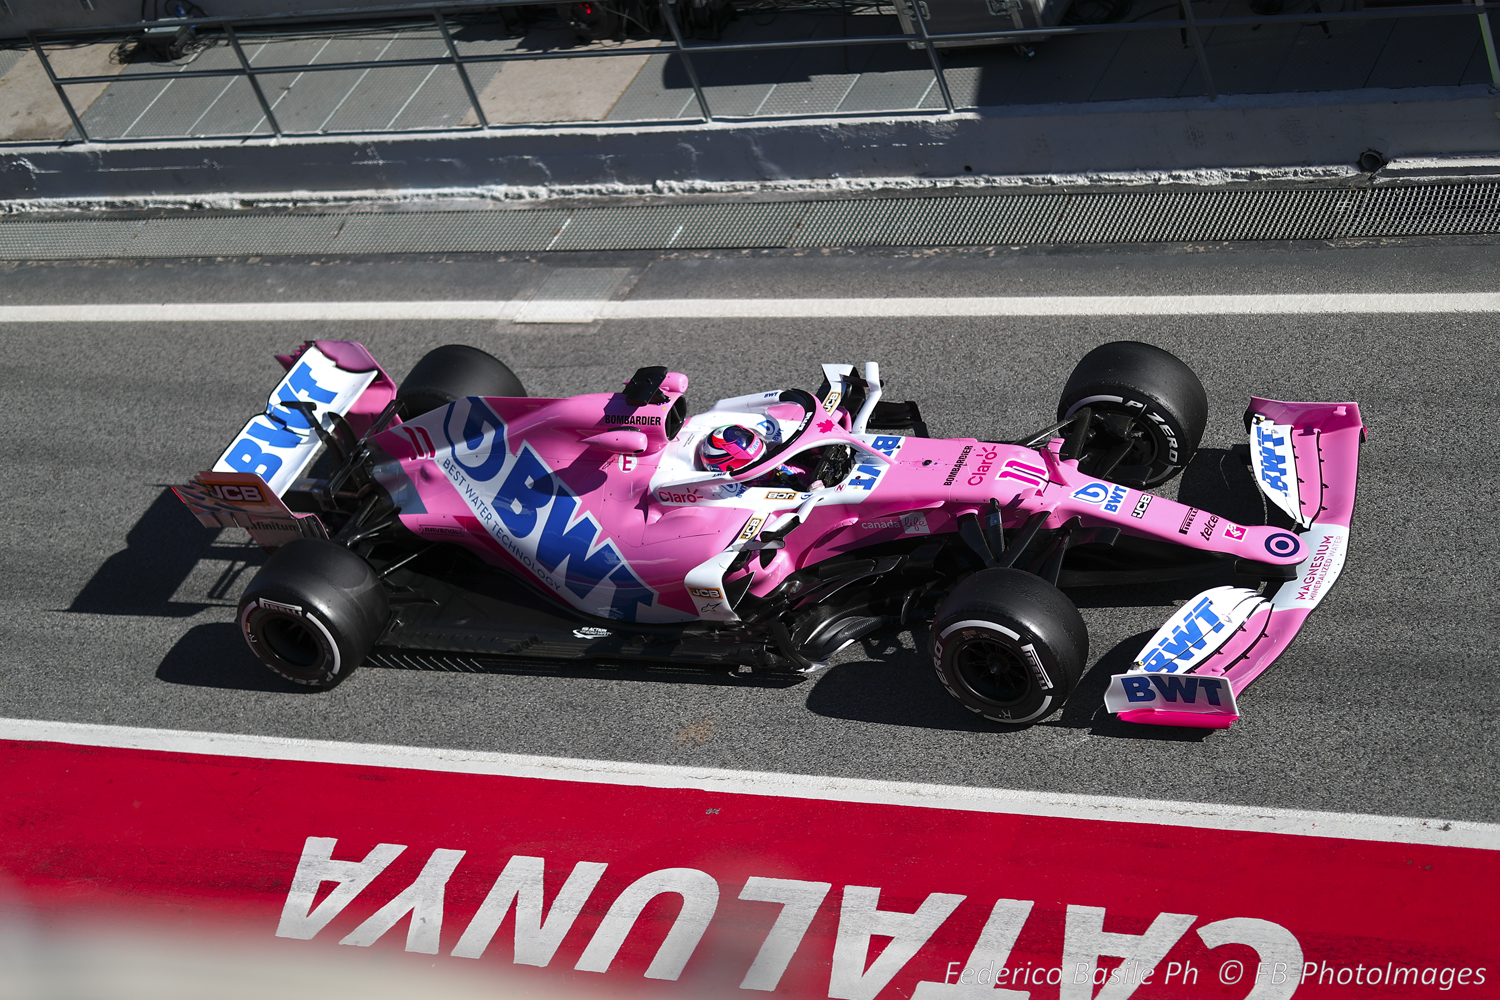 Sergio Perez in the 2019 Mercedes painted pink and called a Racing Point